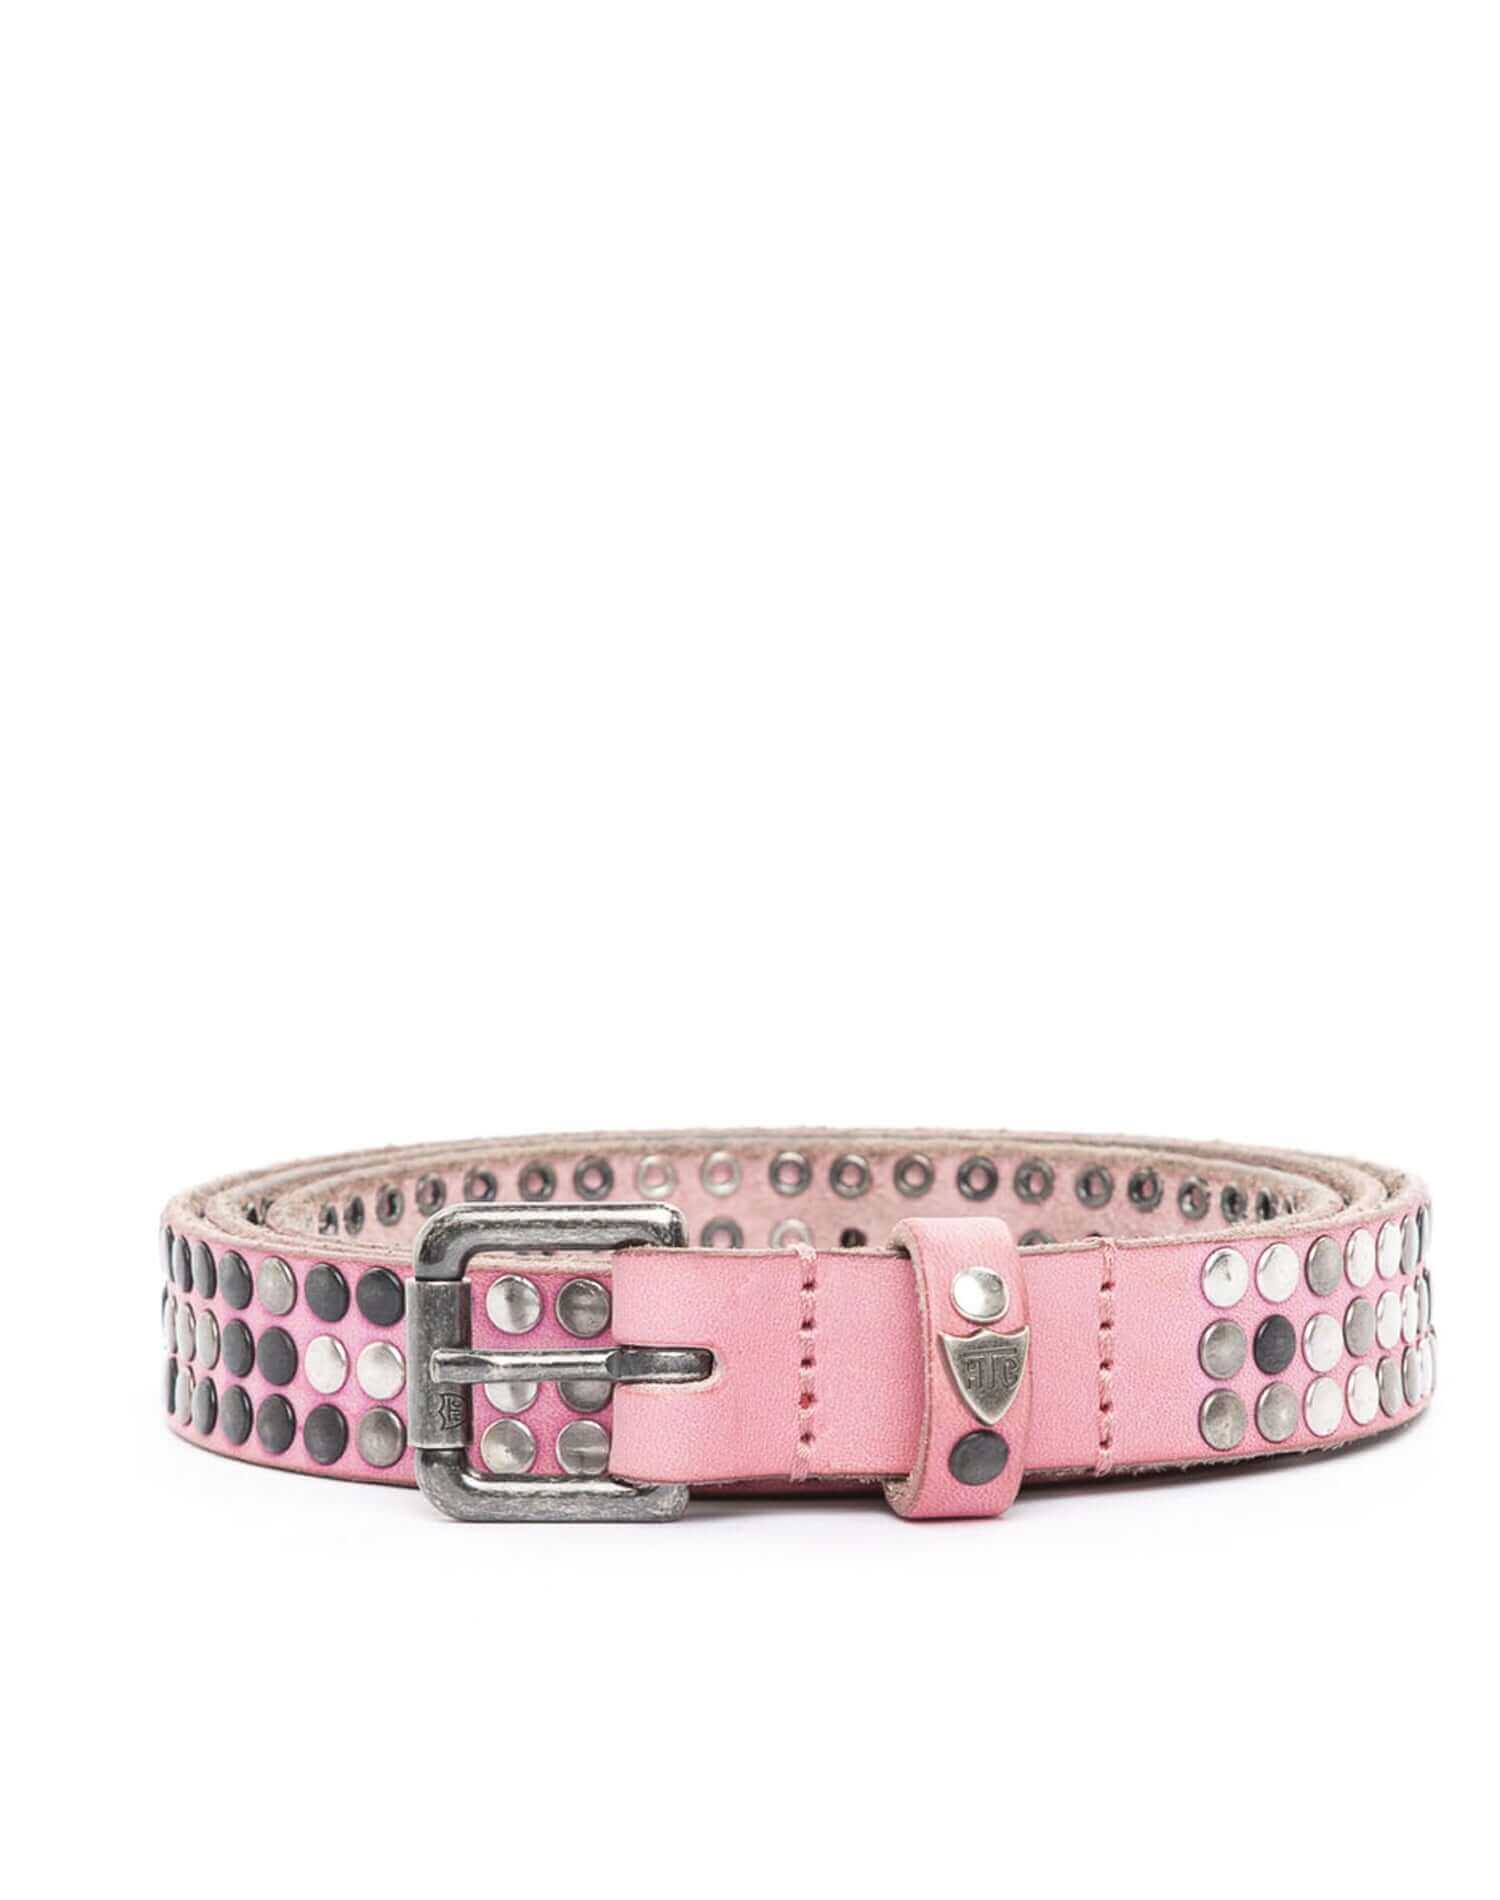 3.000 STUDS BELT Leather belt with multi-finish studs, brass buckle, studded loop and rivet with engraved logo. Made in Italy, 2 cm height. HTC LOS ANGELES